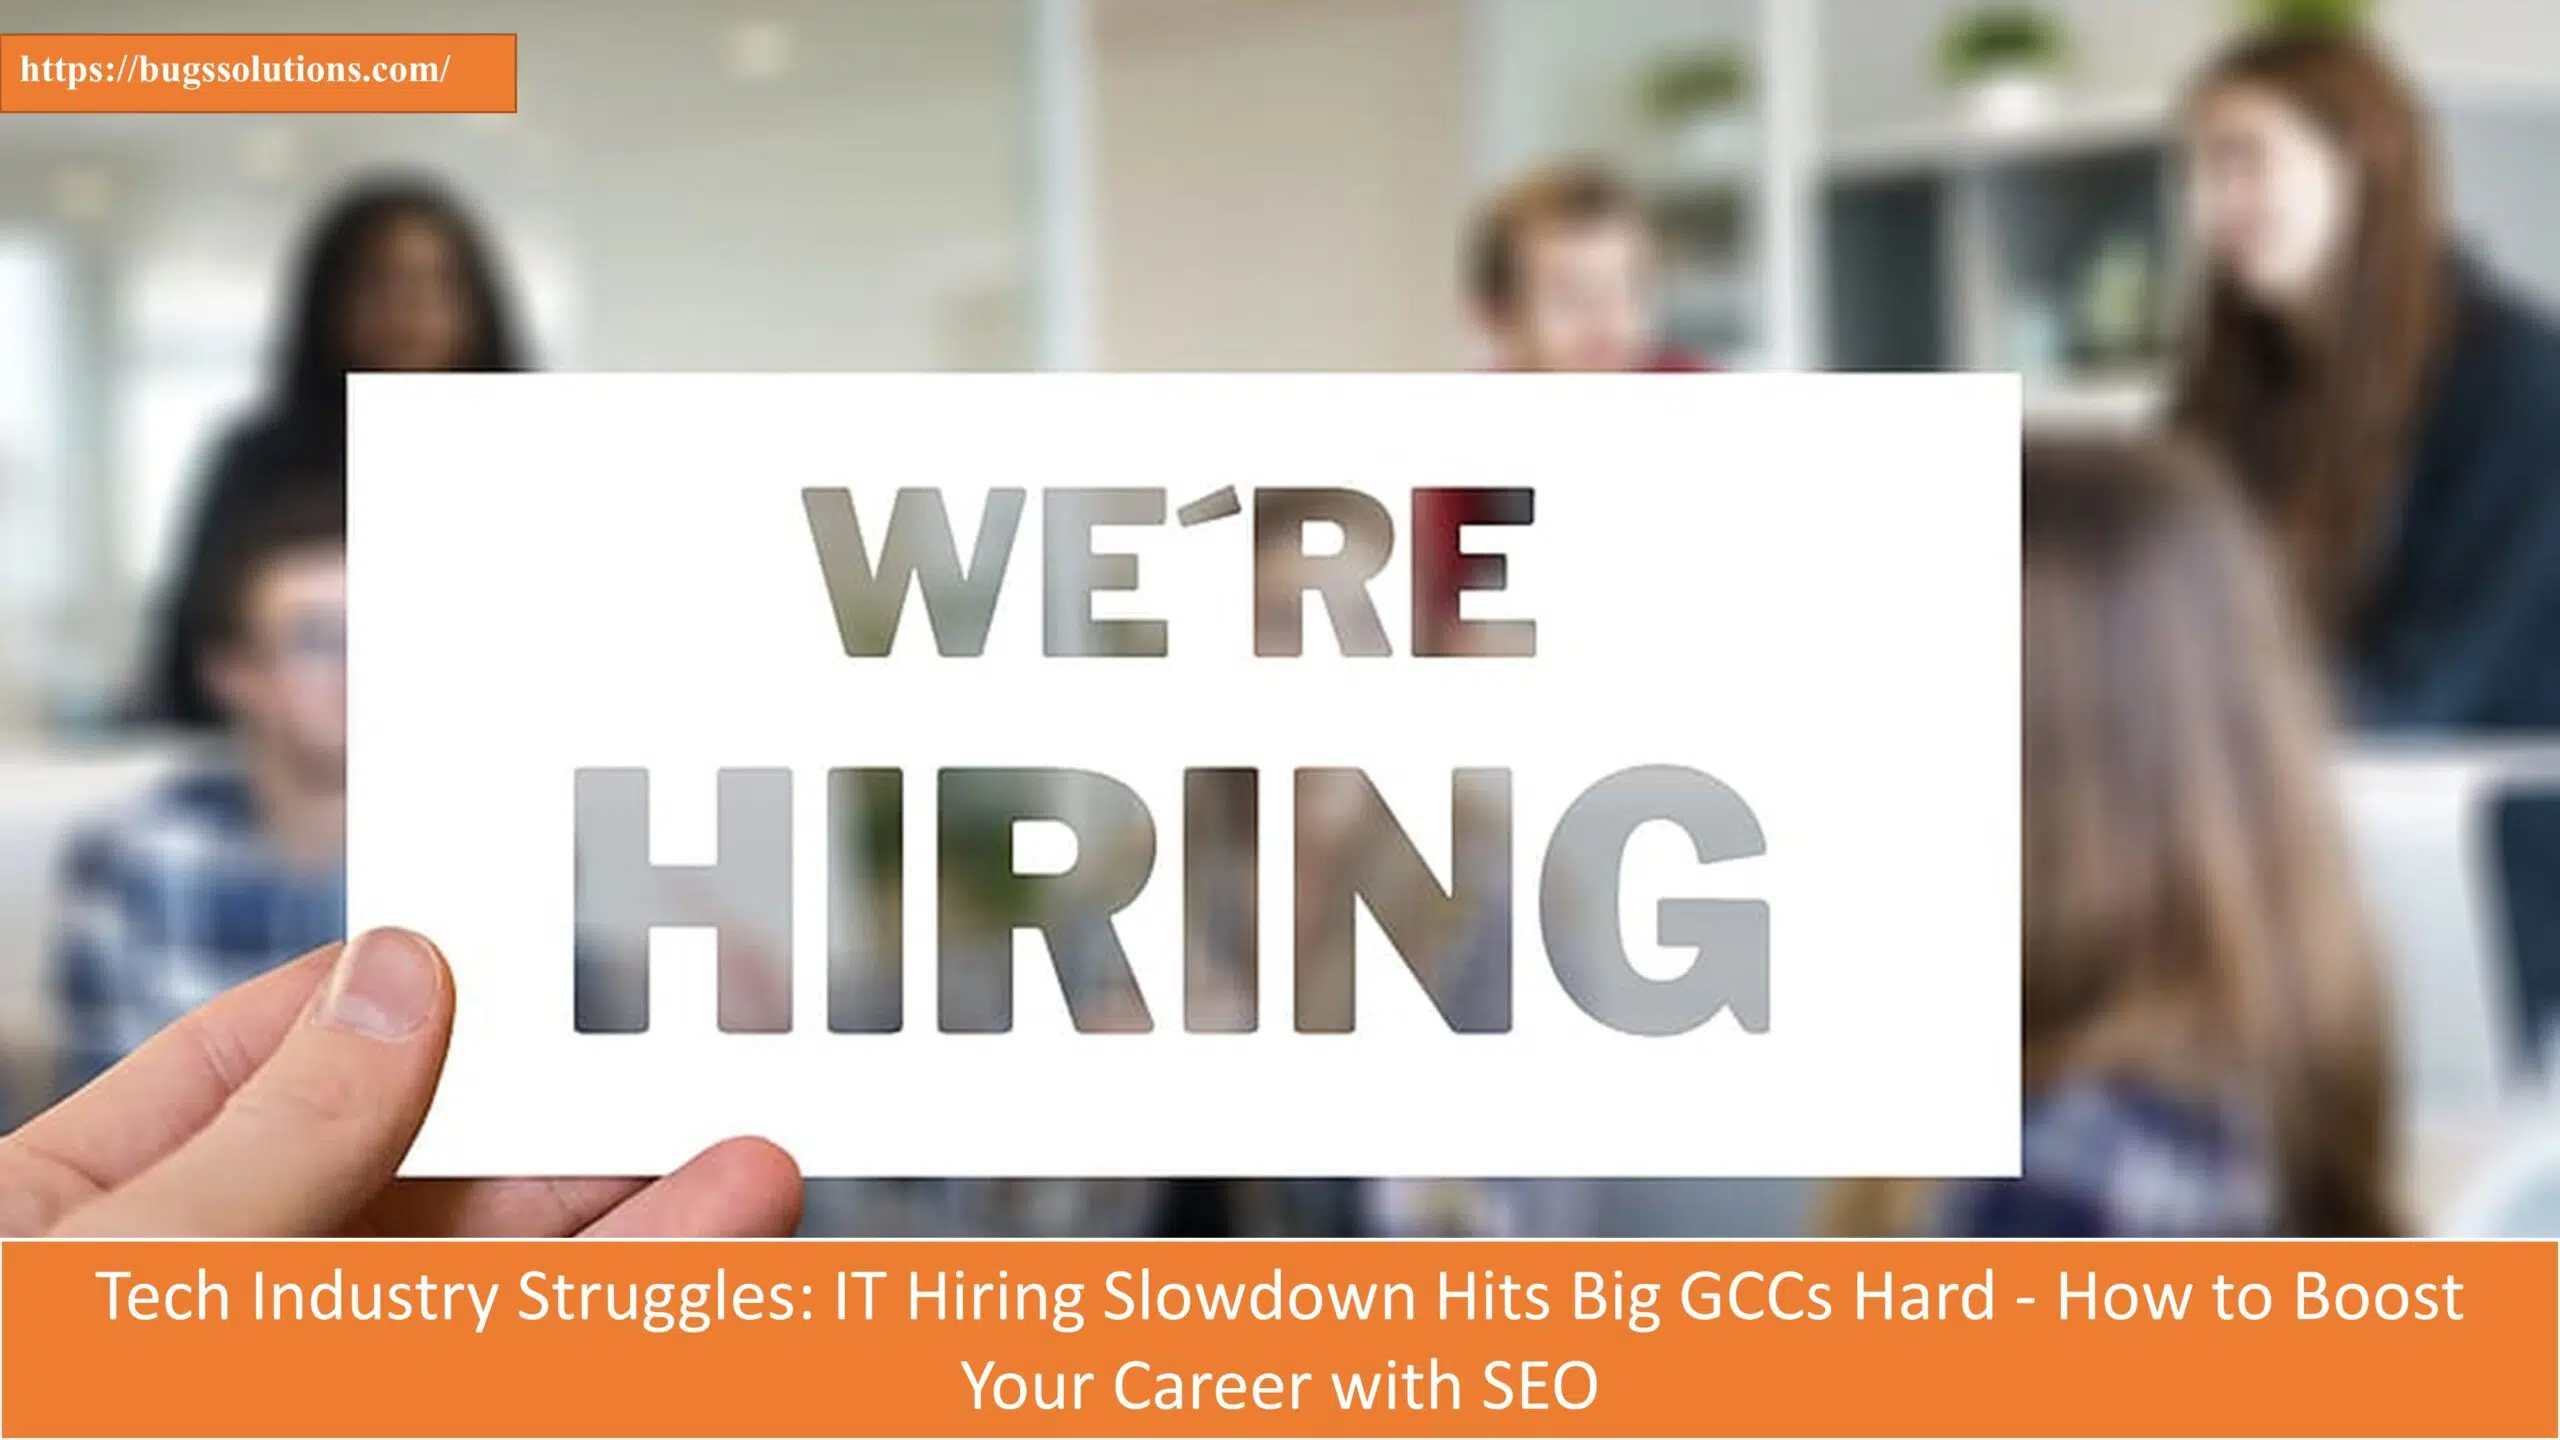 Tech Industry Struggles IT Hiring Slowdown Hits Big GCCs Hard - How to Boost Your Career with SEO